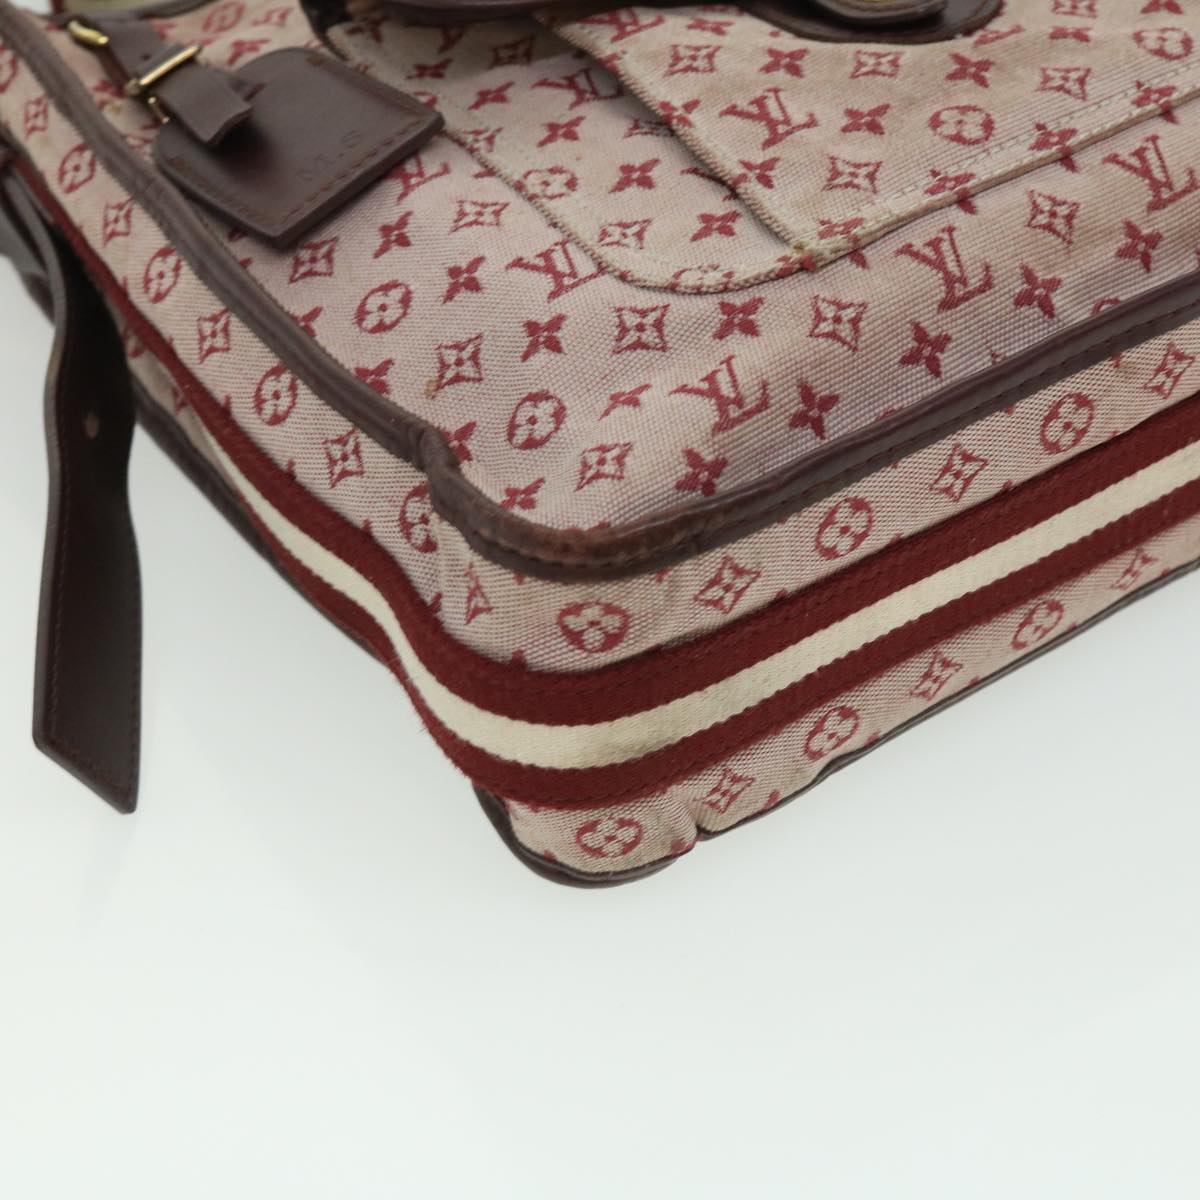 LOUIS VUITTON Monogram Mini Besace Mary Kate Shoulder Bag Red M92321 Auth bs2182